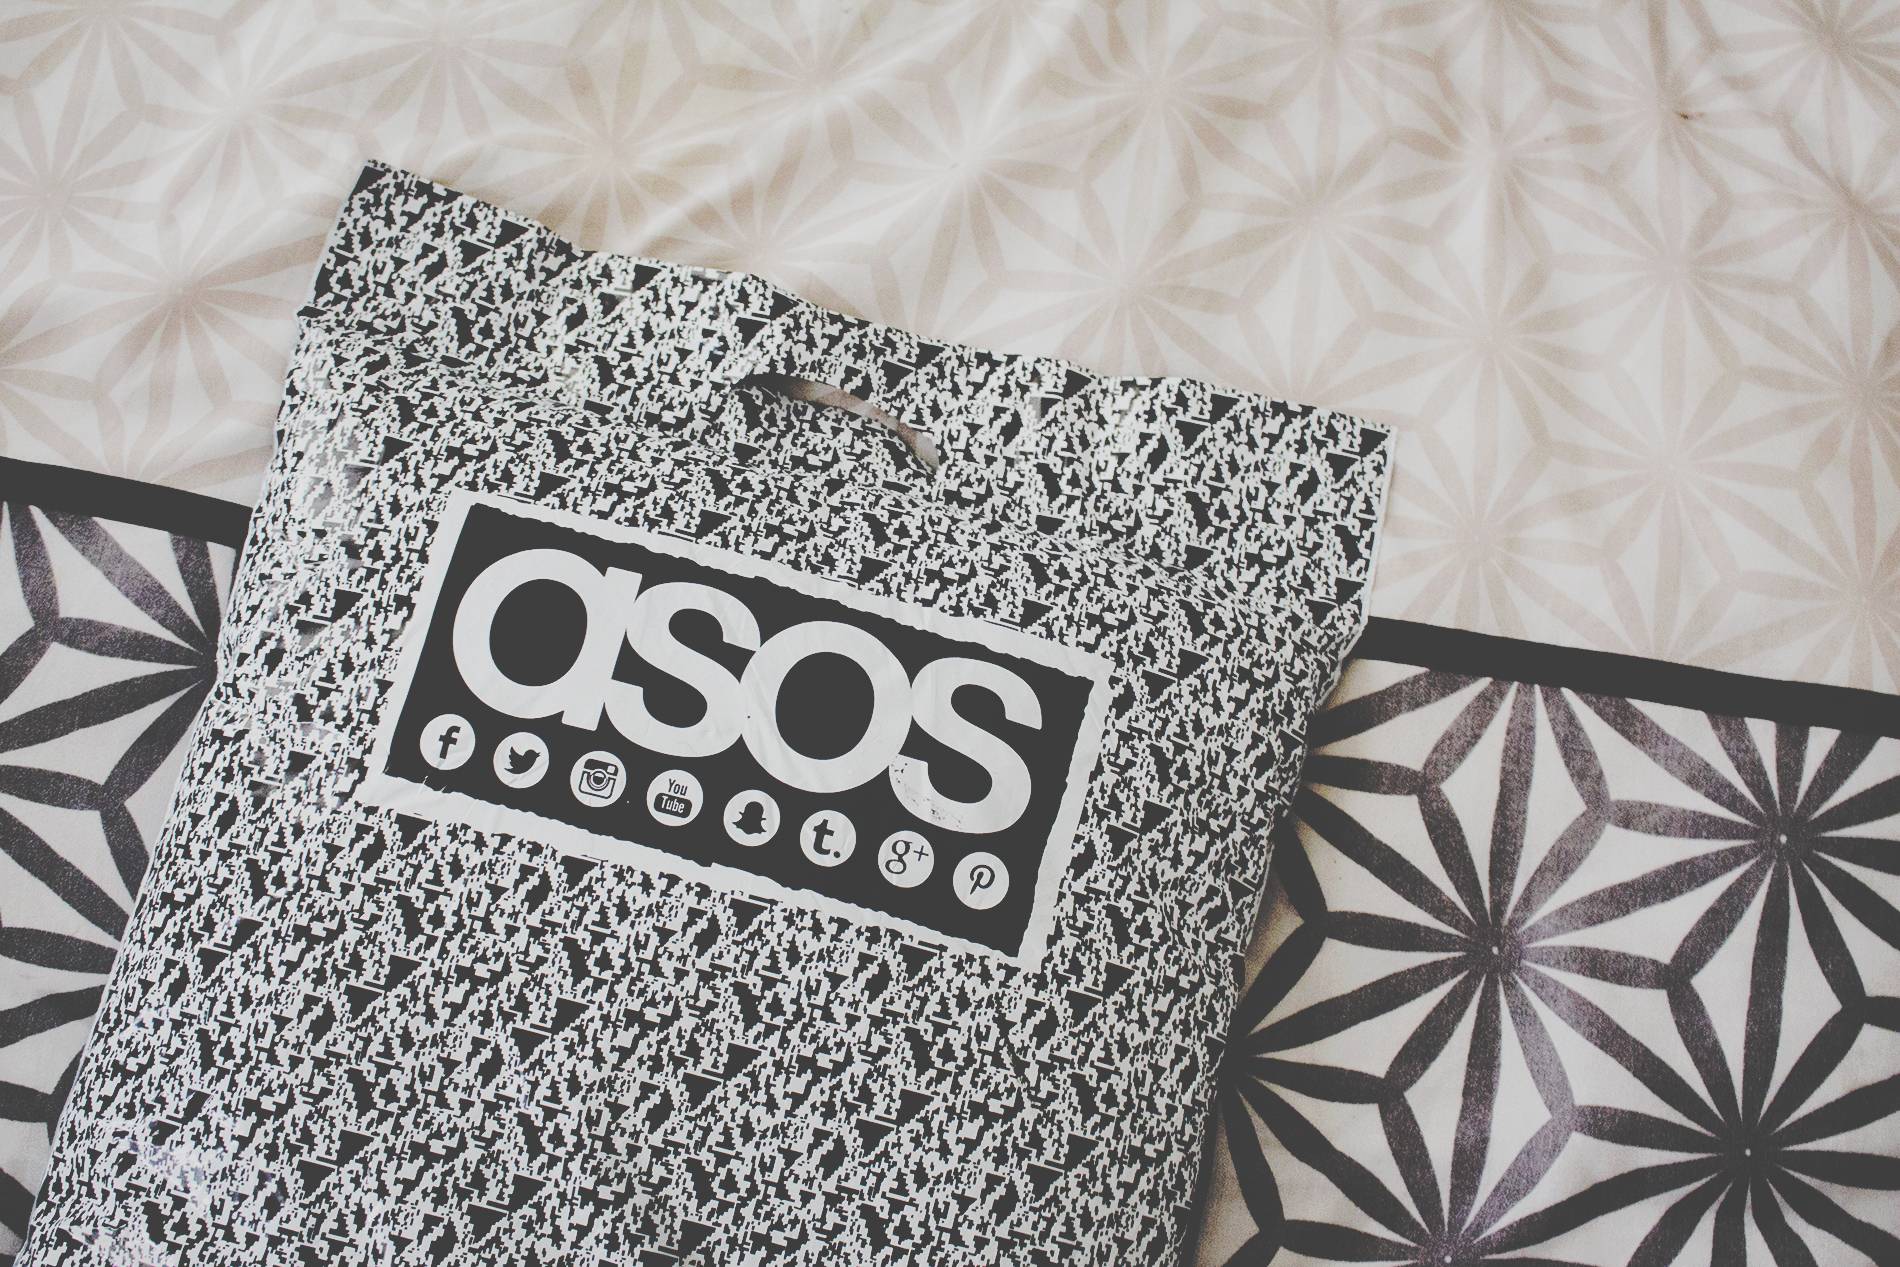 Asos Defends Pay from Union Criticism as Annual Profits Rise 37%